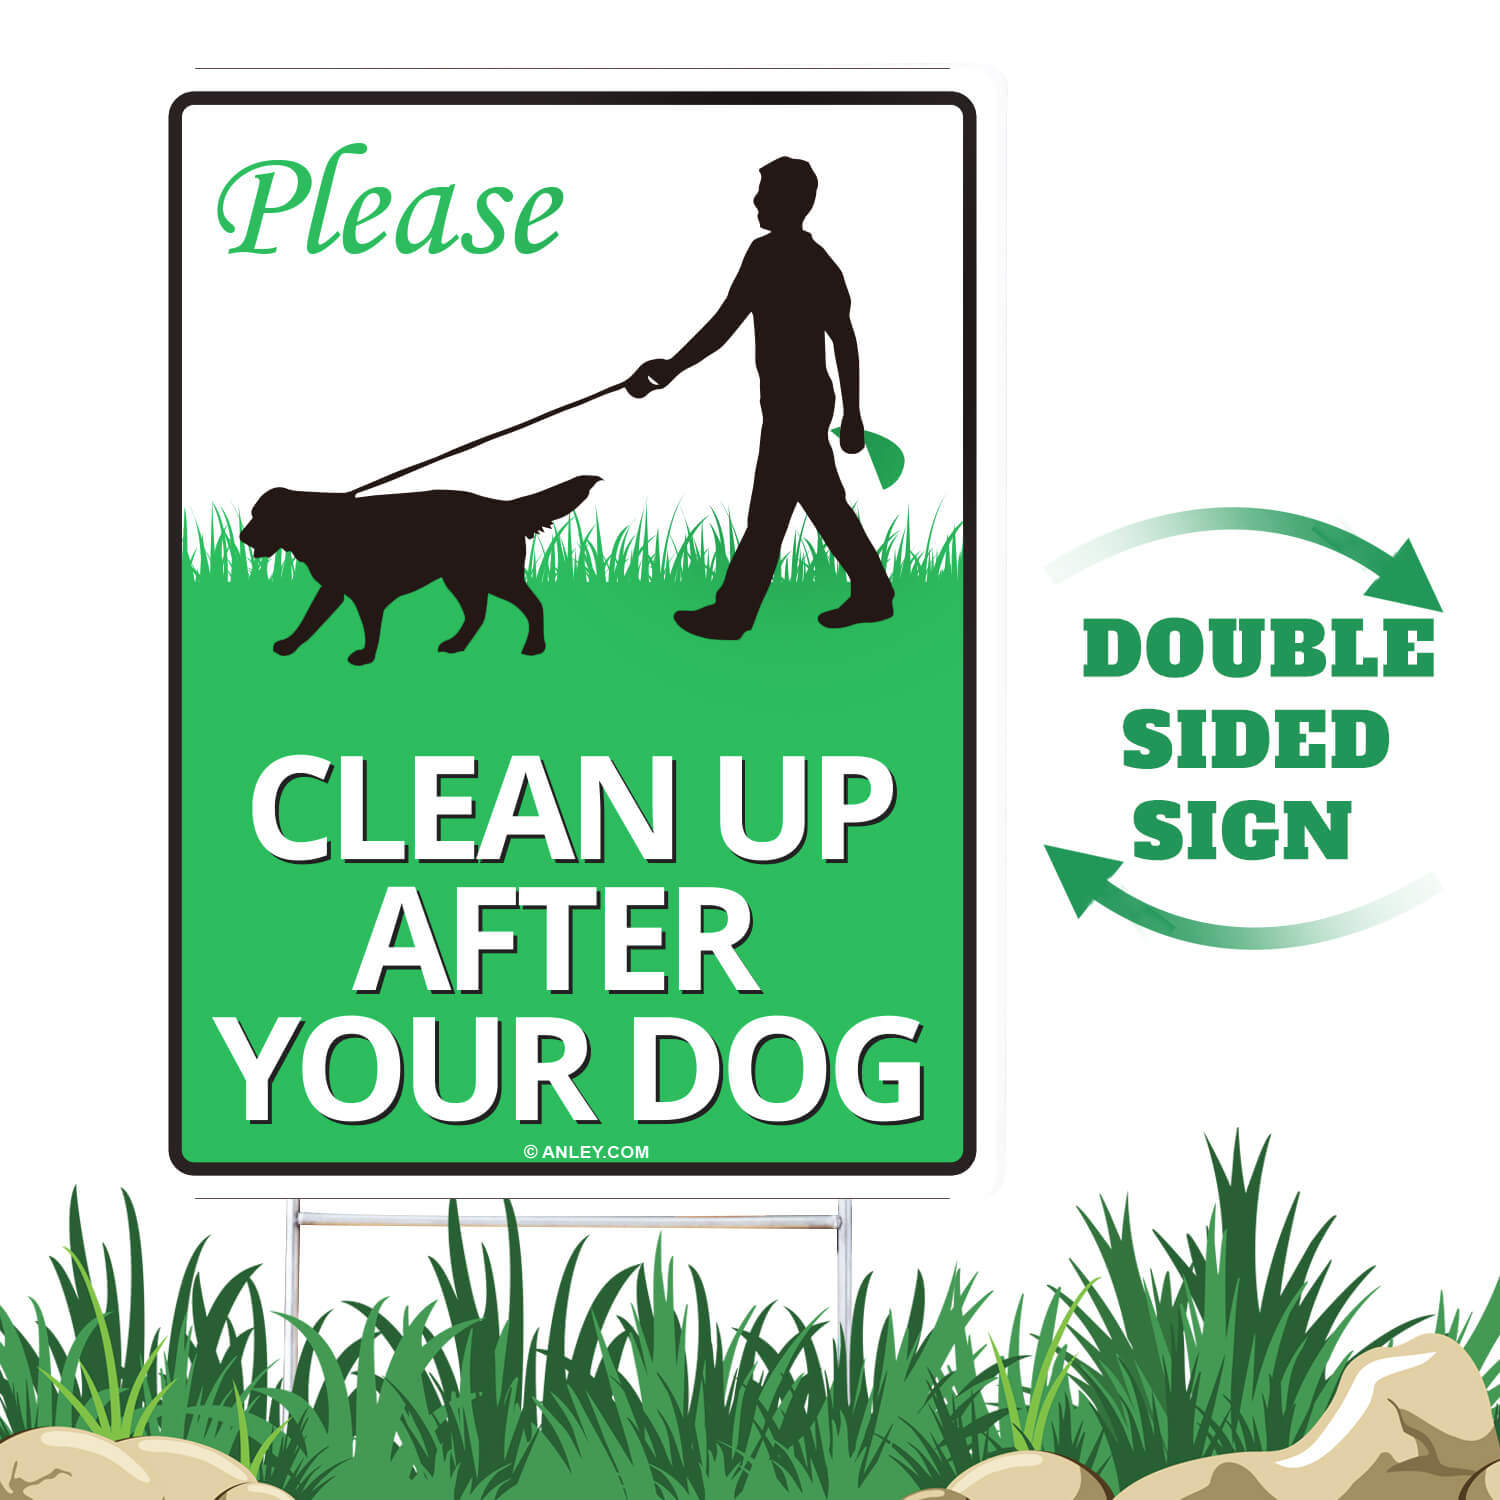 Clean Up After Your Dog Yard Sign 12x19 Inch Anley Flags